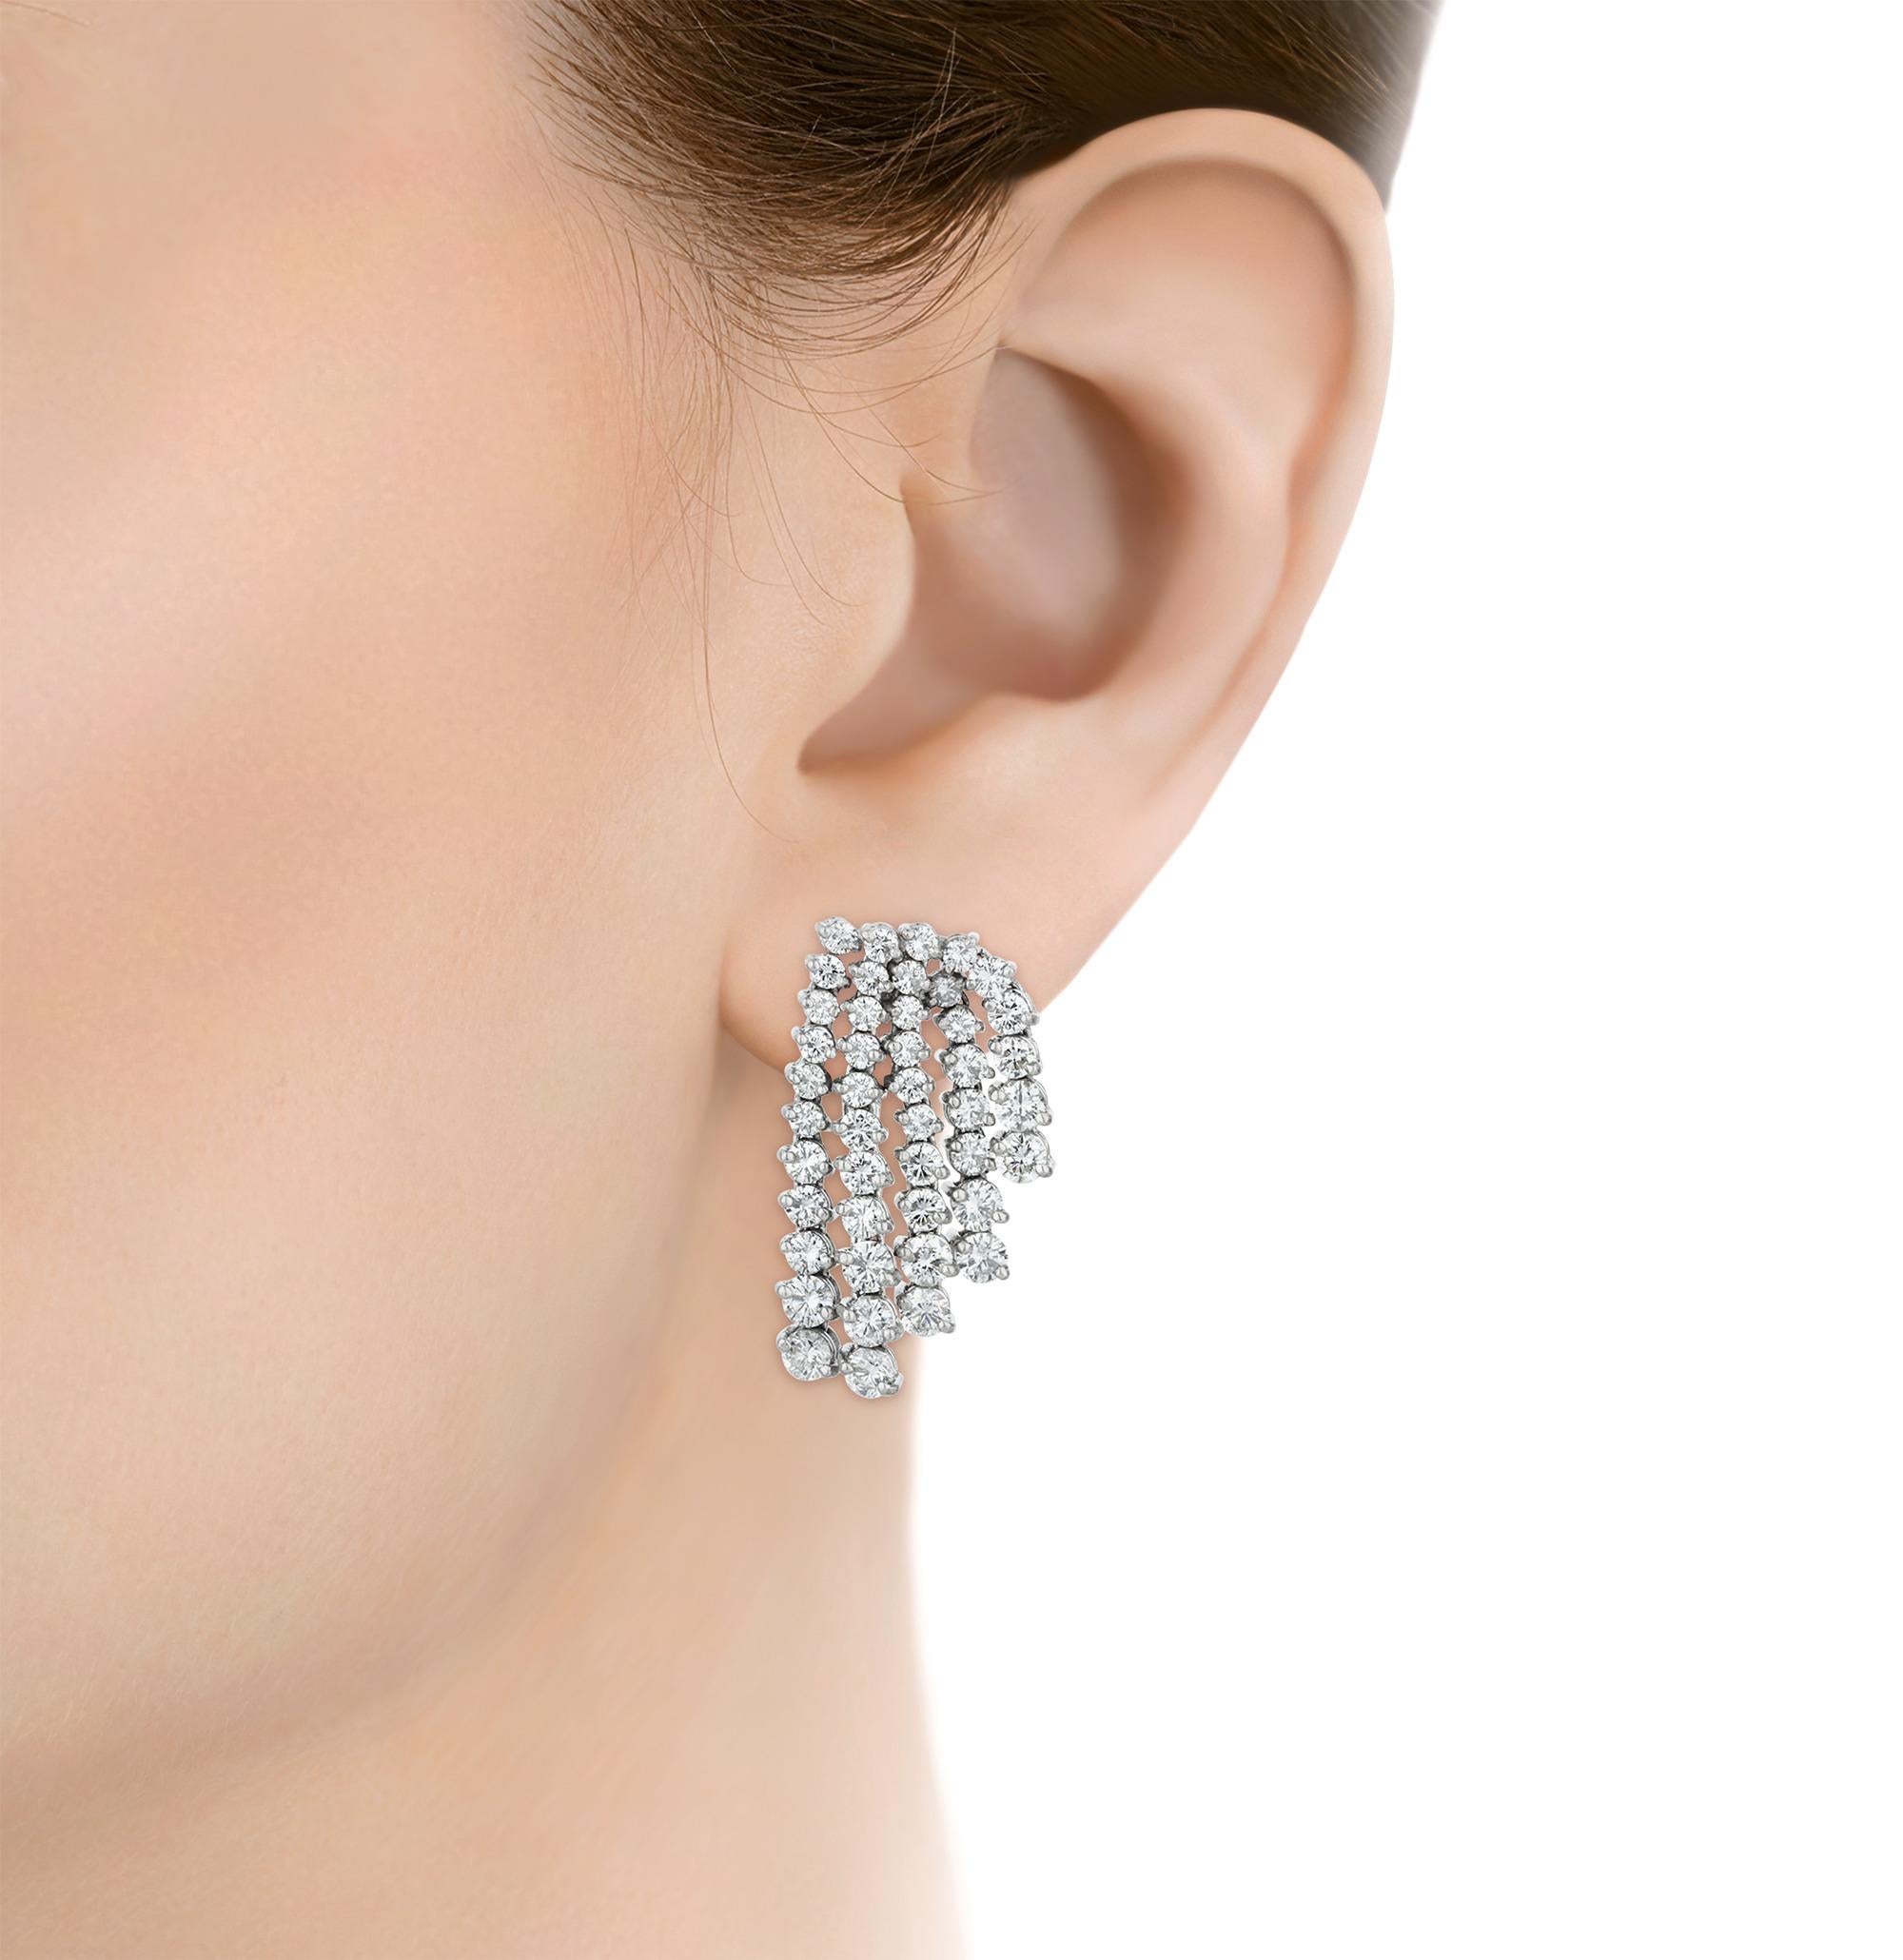 These timeless earrings feature 90 round brilliant cut diamonds of G-I color and SI1-I1 clarity totaling approximately 7.50 carats. The diamonds cascade in shimmering strands meticulously arranged to accentuate the exceptional quality of each